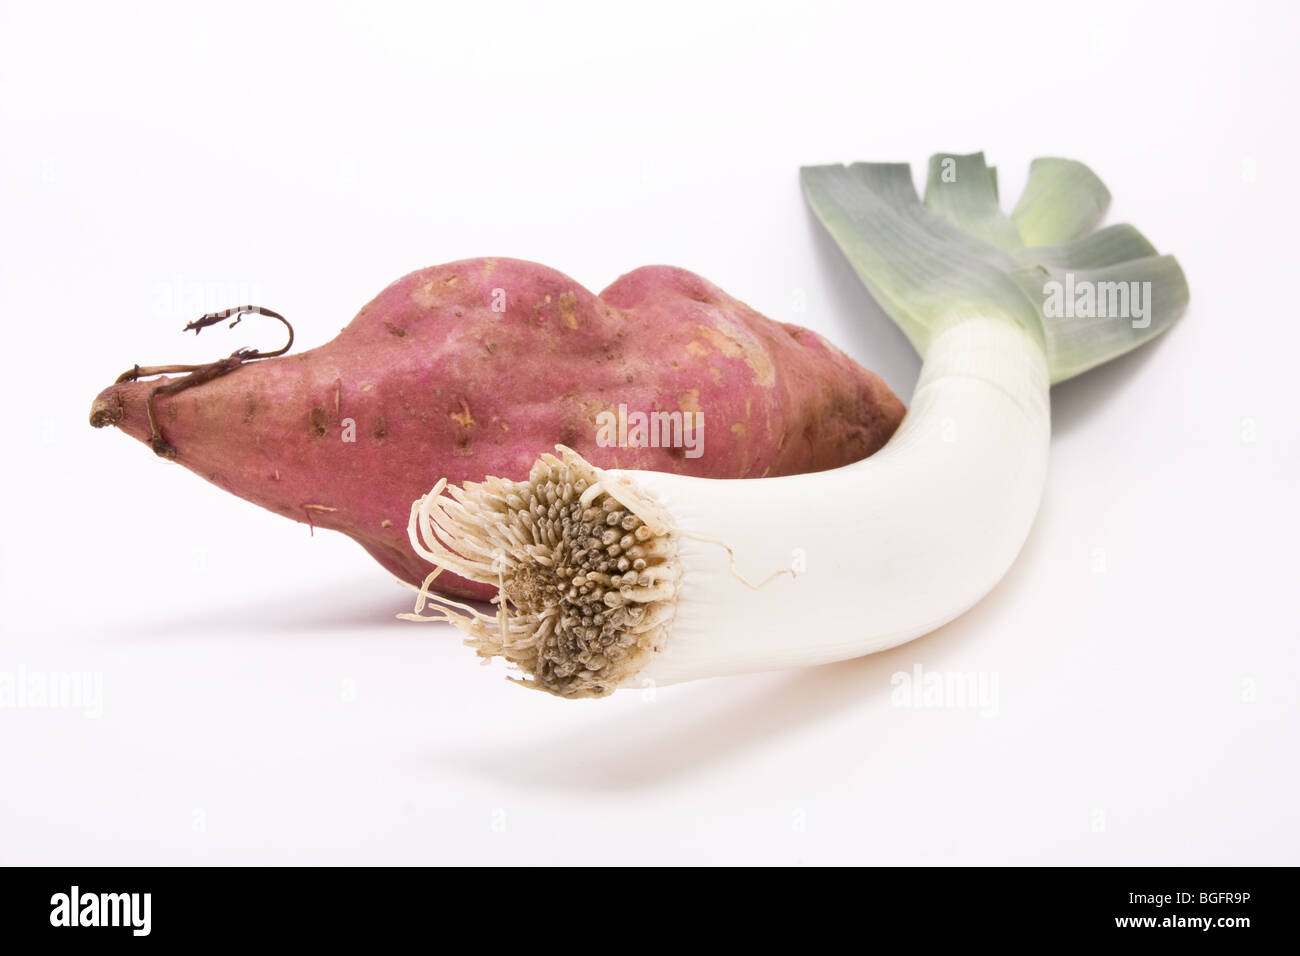 Sweet potato and Leek against white background from low perspective. Stock Photo